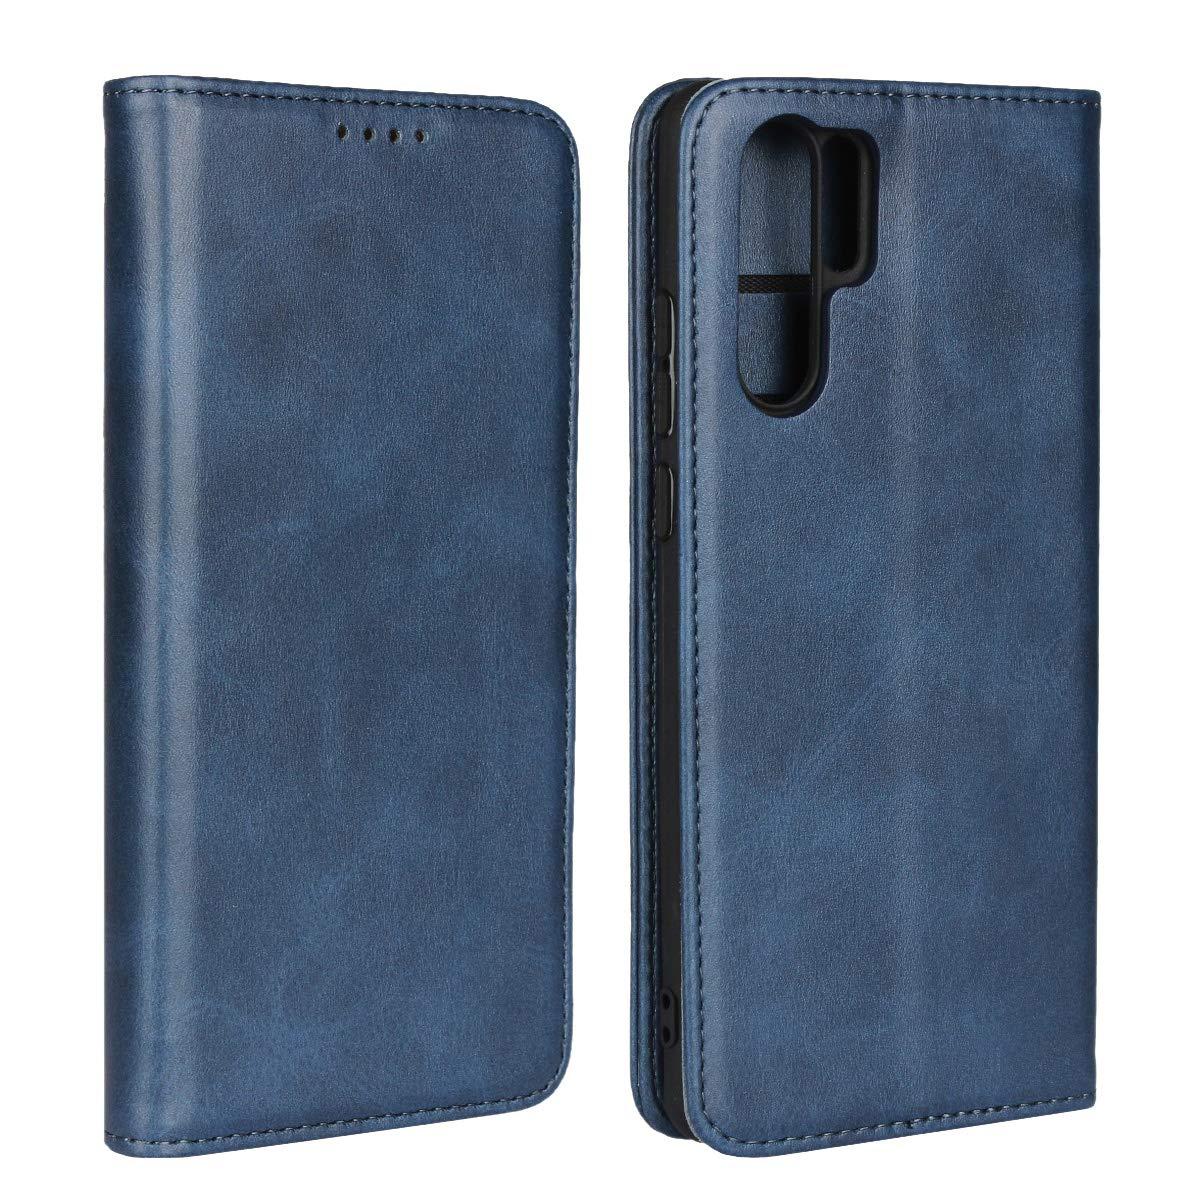 SailorTech Huawei P30 Pro Wallet Case, Premium PU Leather Case Flip Cases Folio Cover with Kickstand Card Slots Holder Strong Magnetic Closure Phone Case - Navy Blue 0